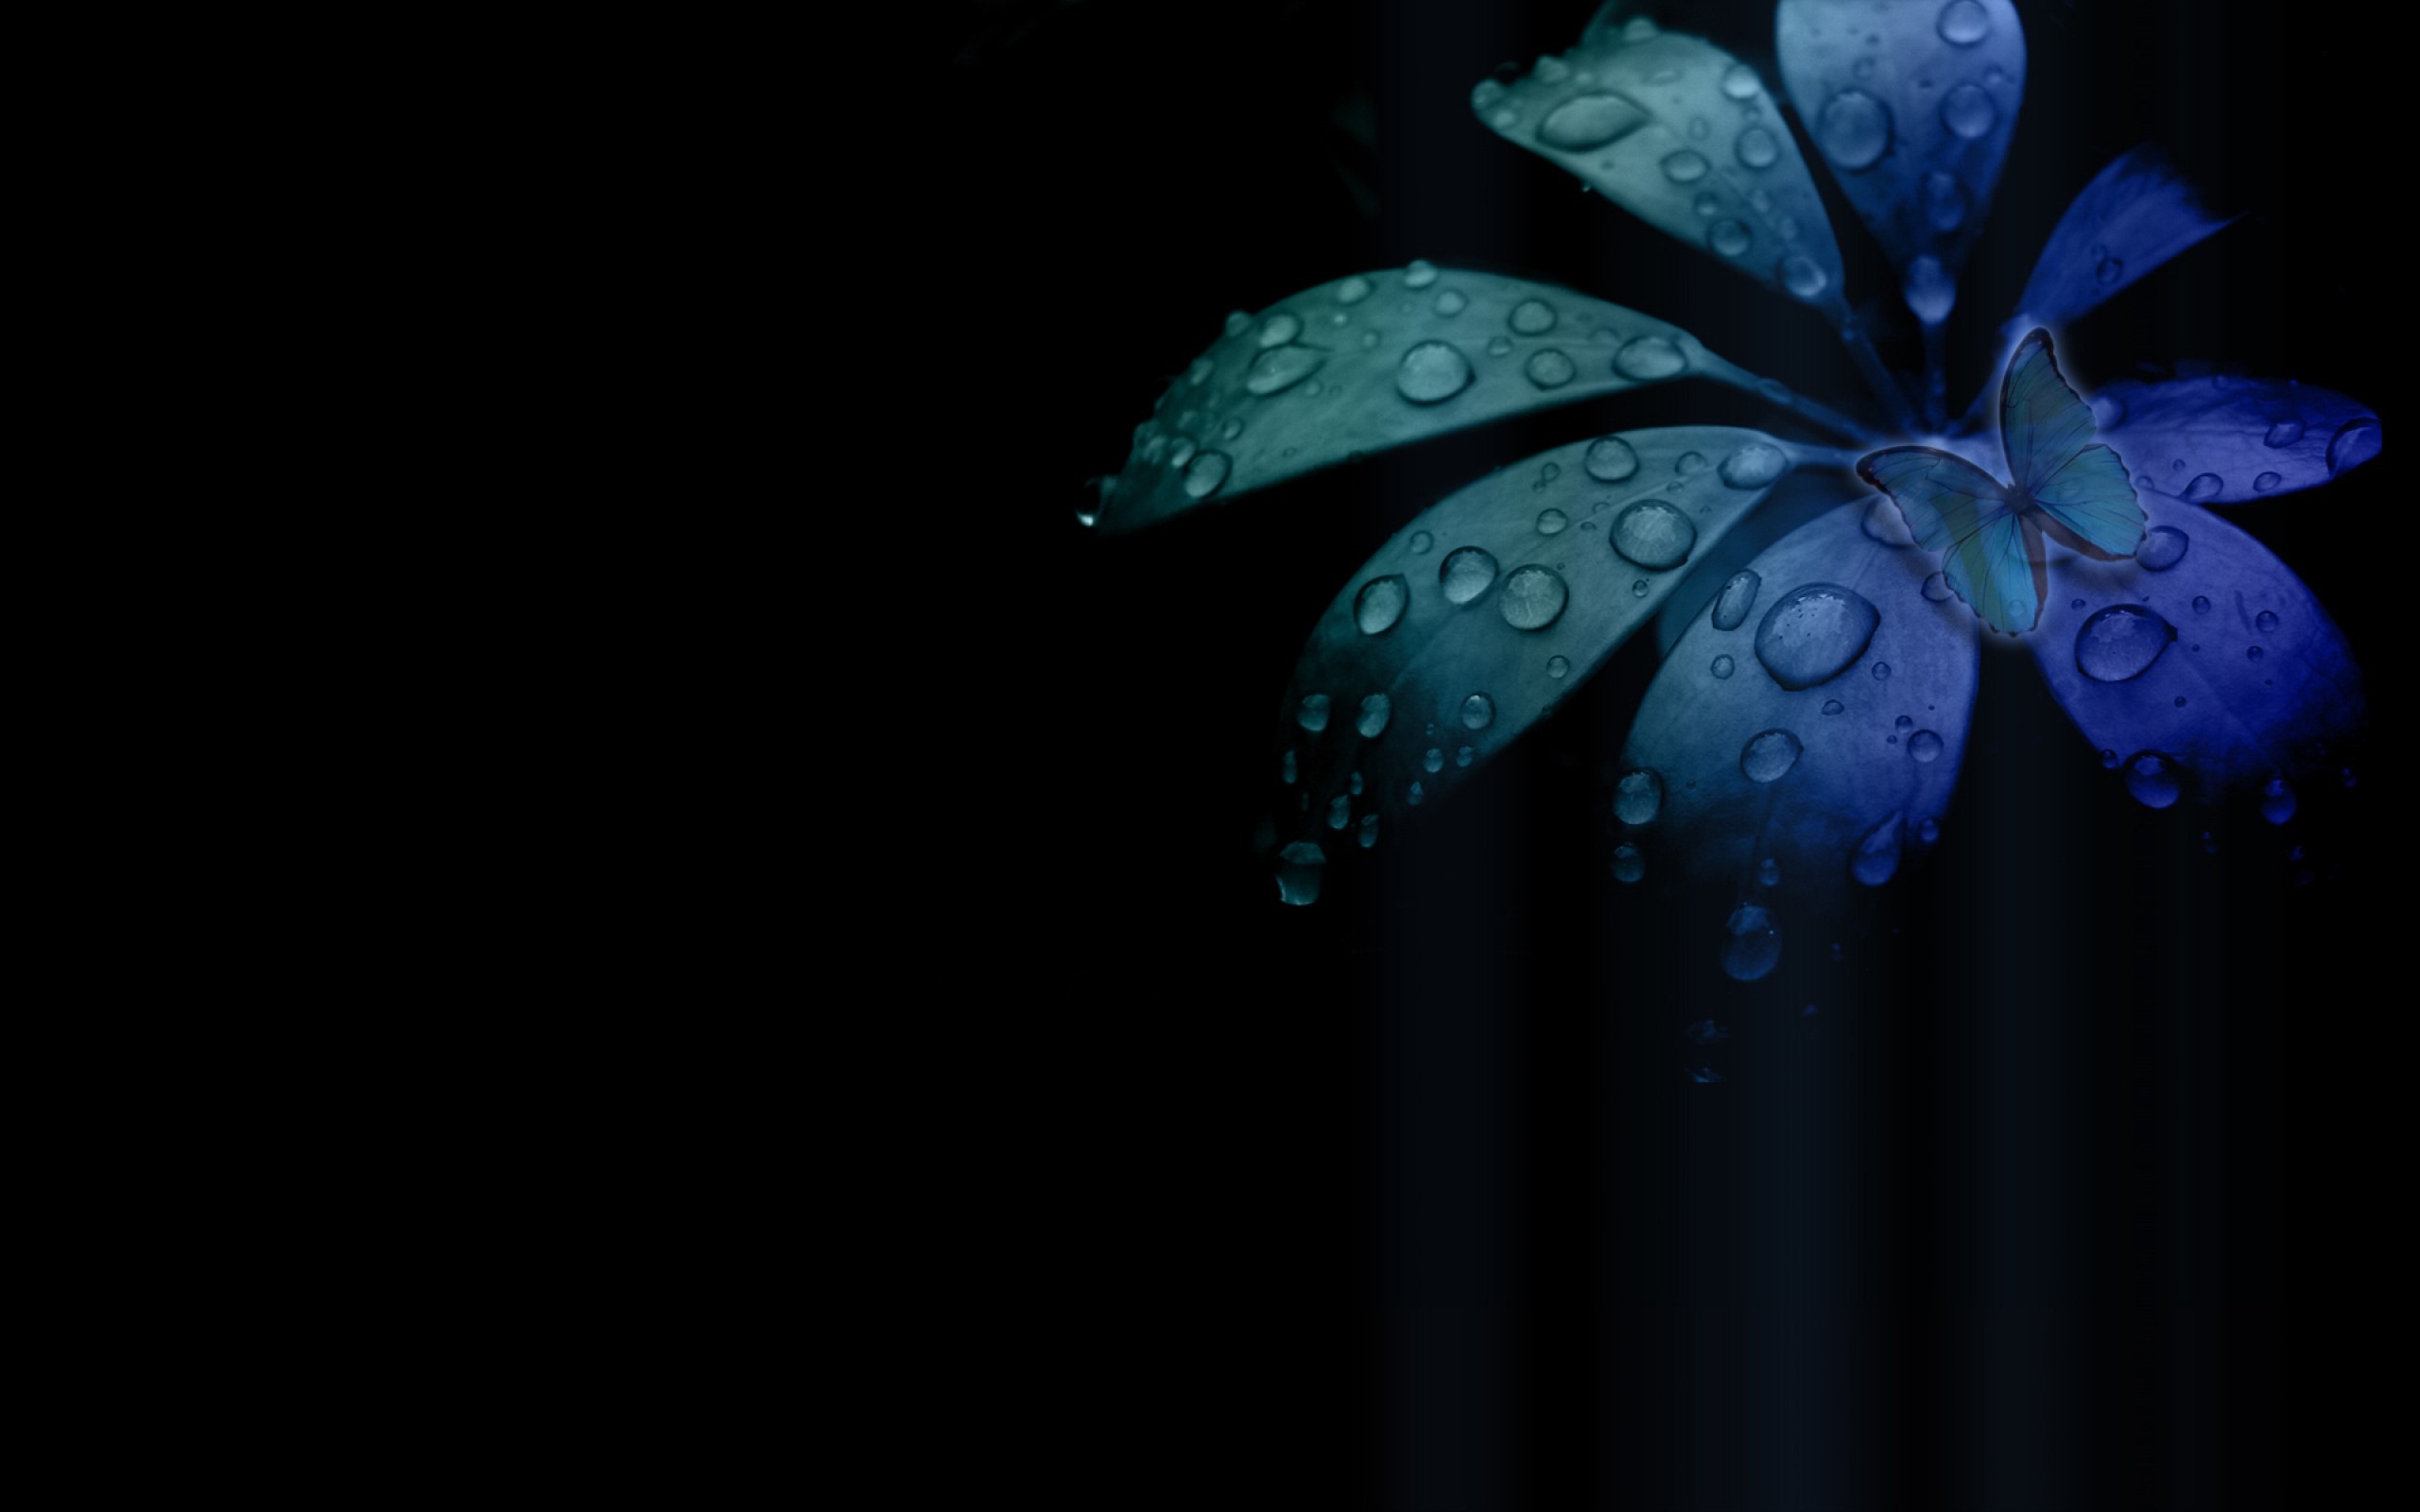 Black background hd wallpapers